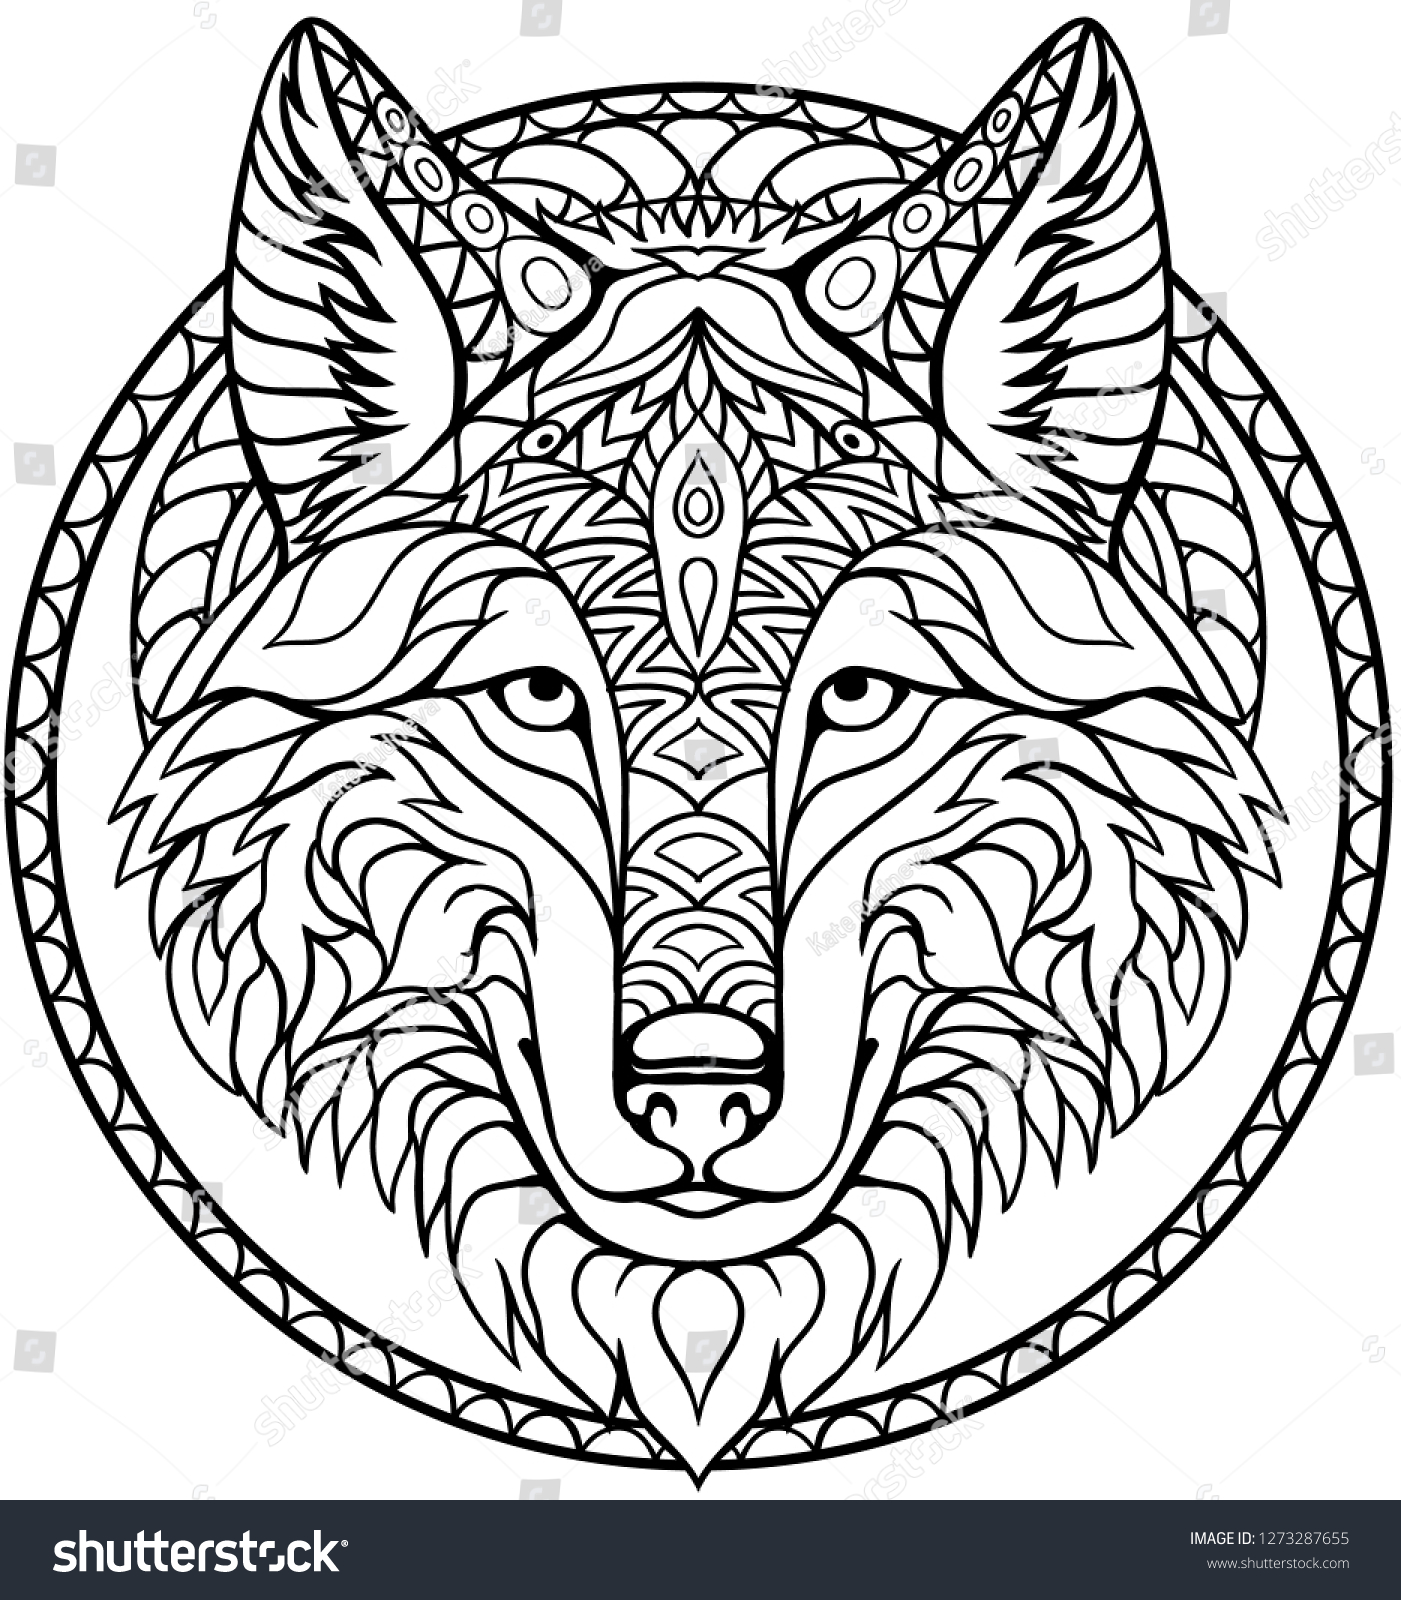 Wolf coloring book Images, Stock Photos & Vectors | Shutterstock